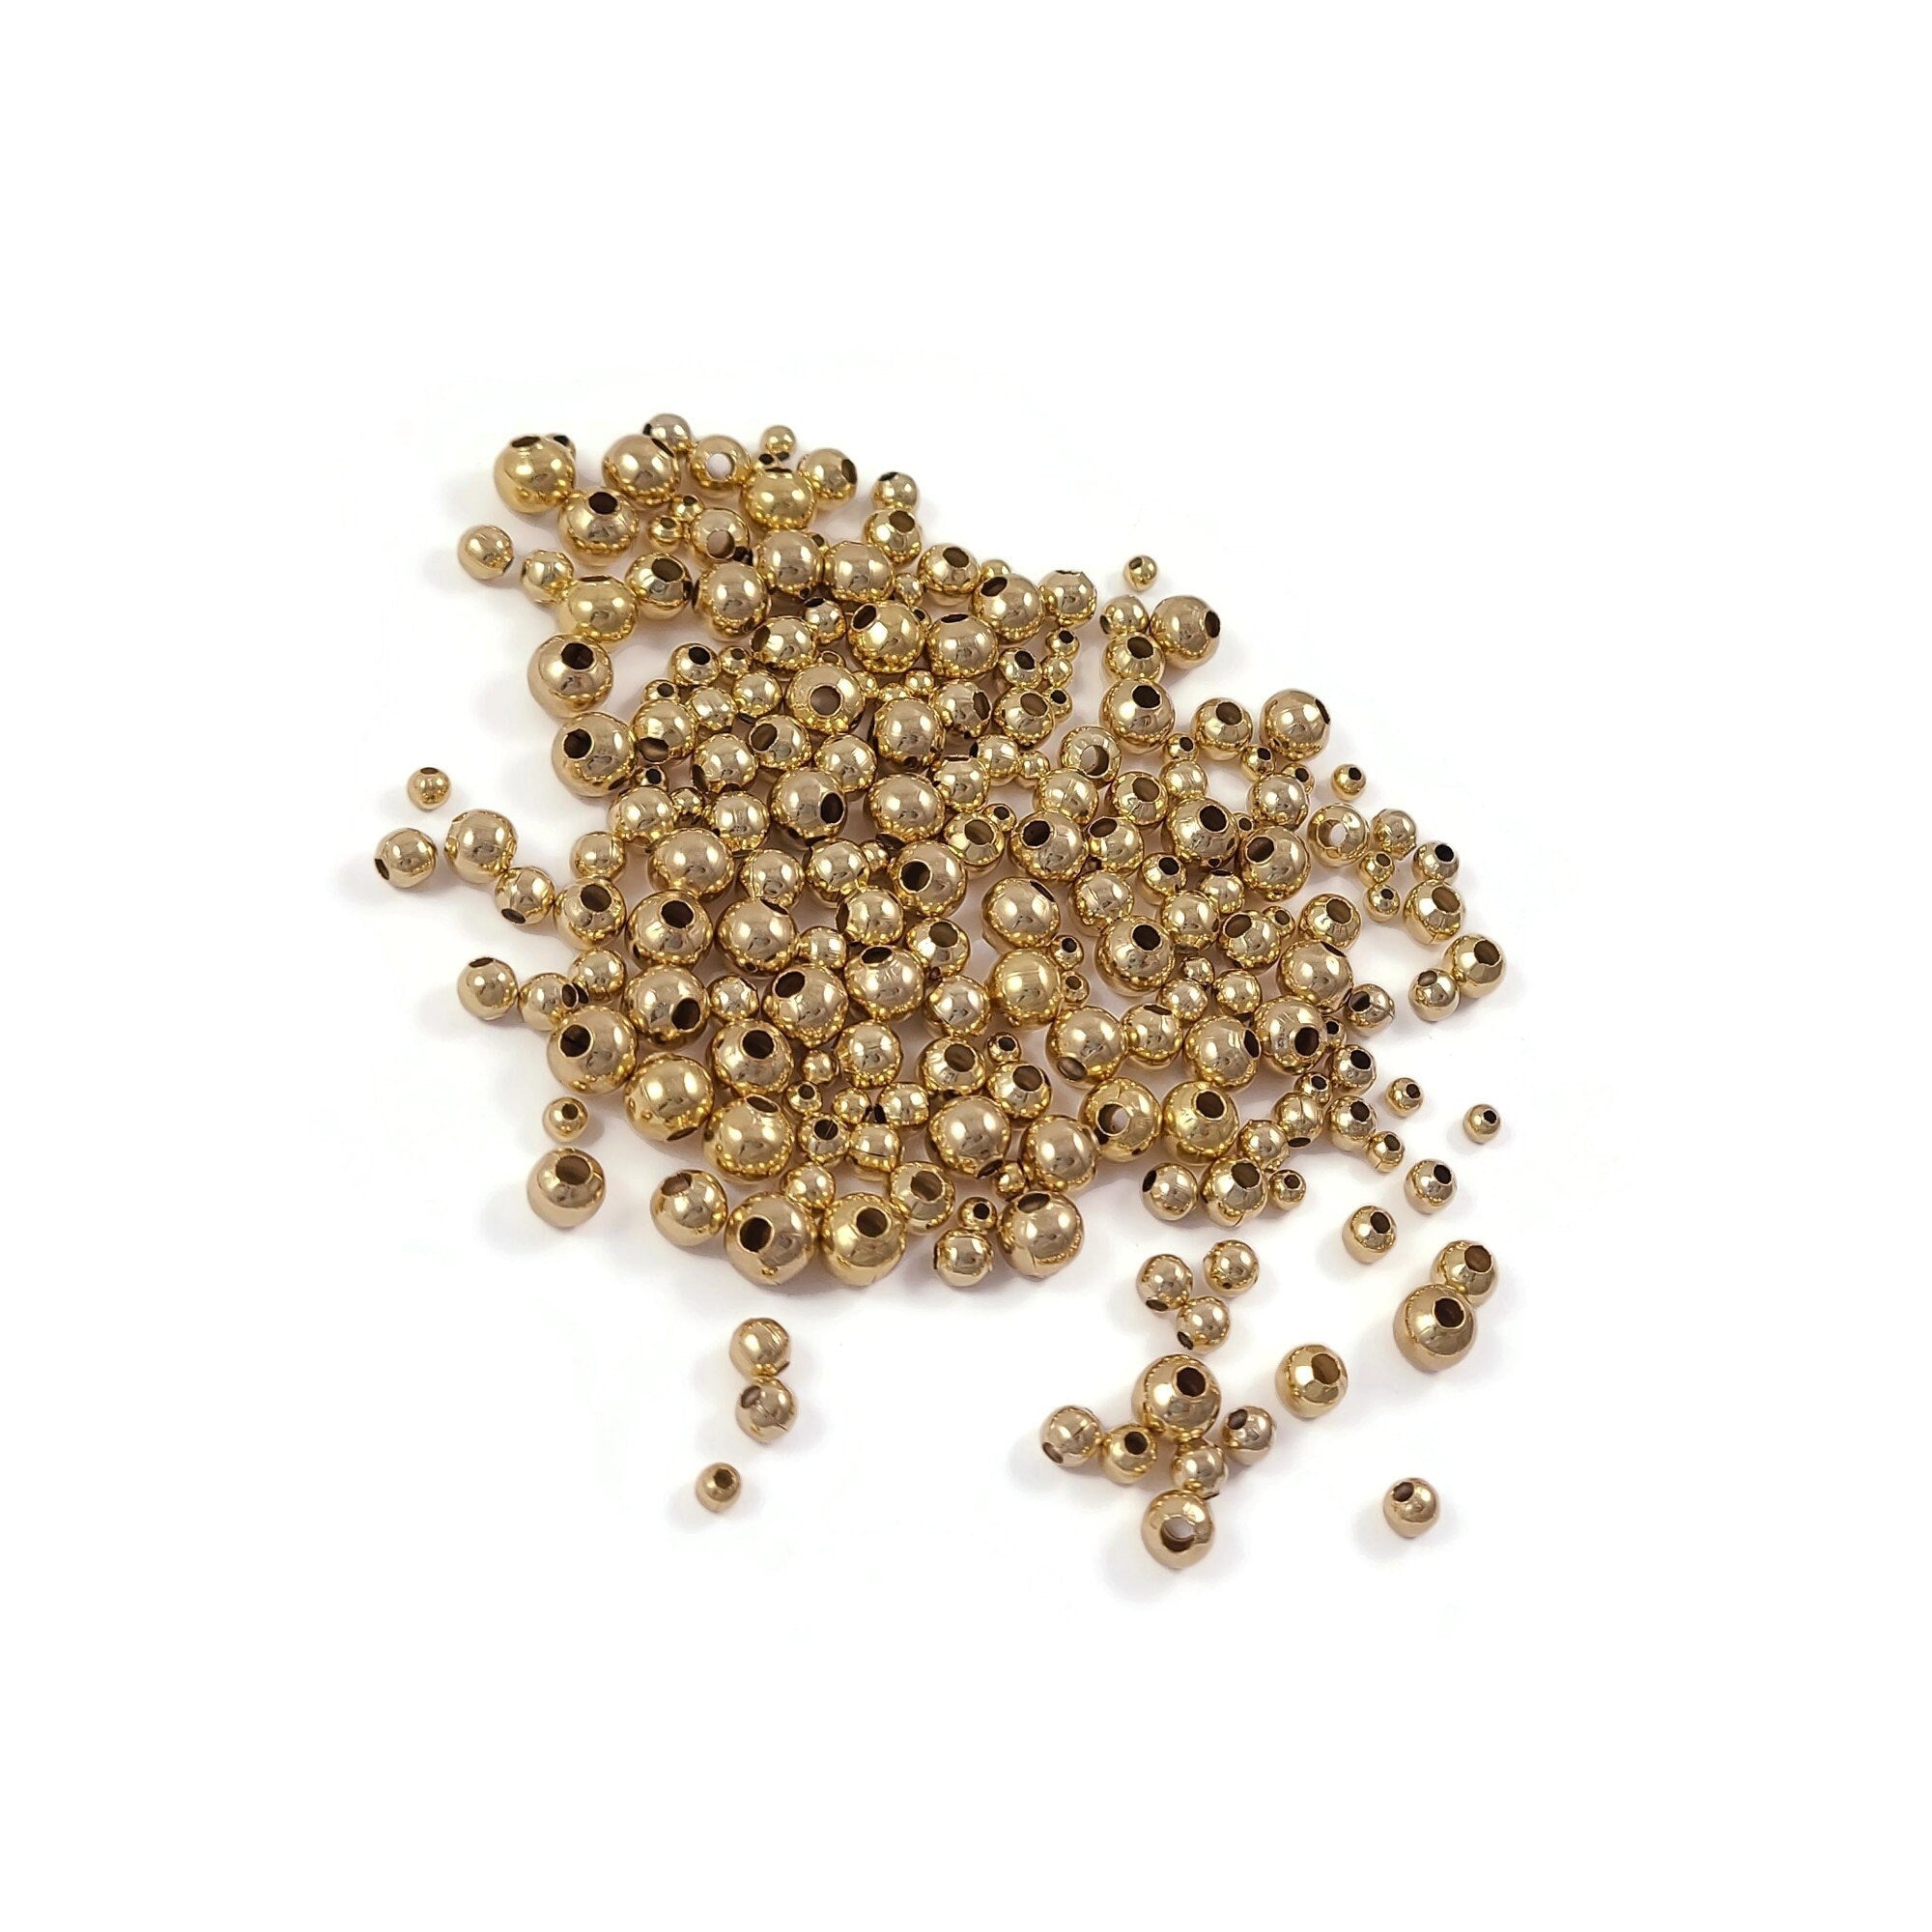 Gold stainless steel beads-Round spacers-Bulk jewelry making supplies